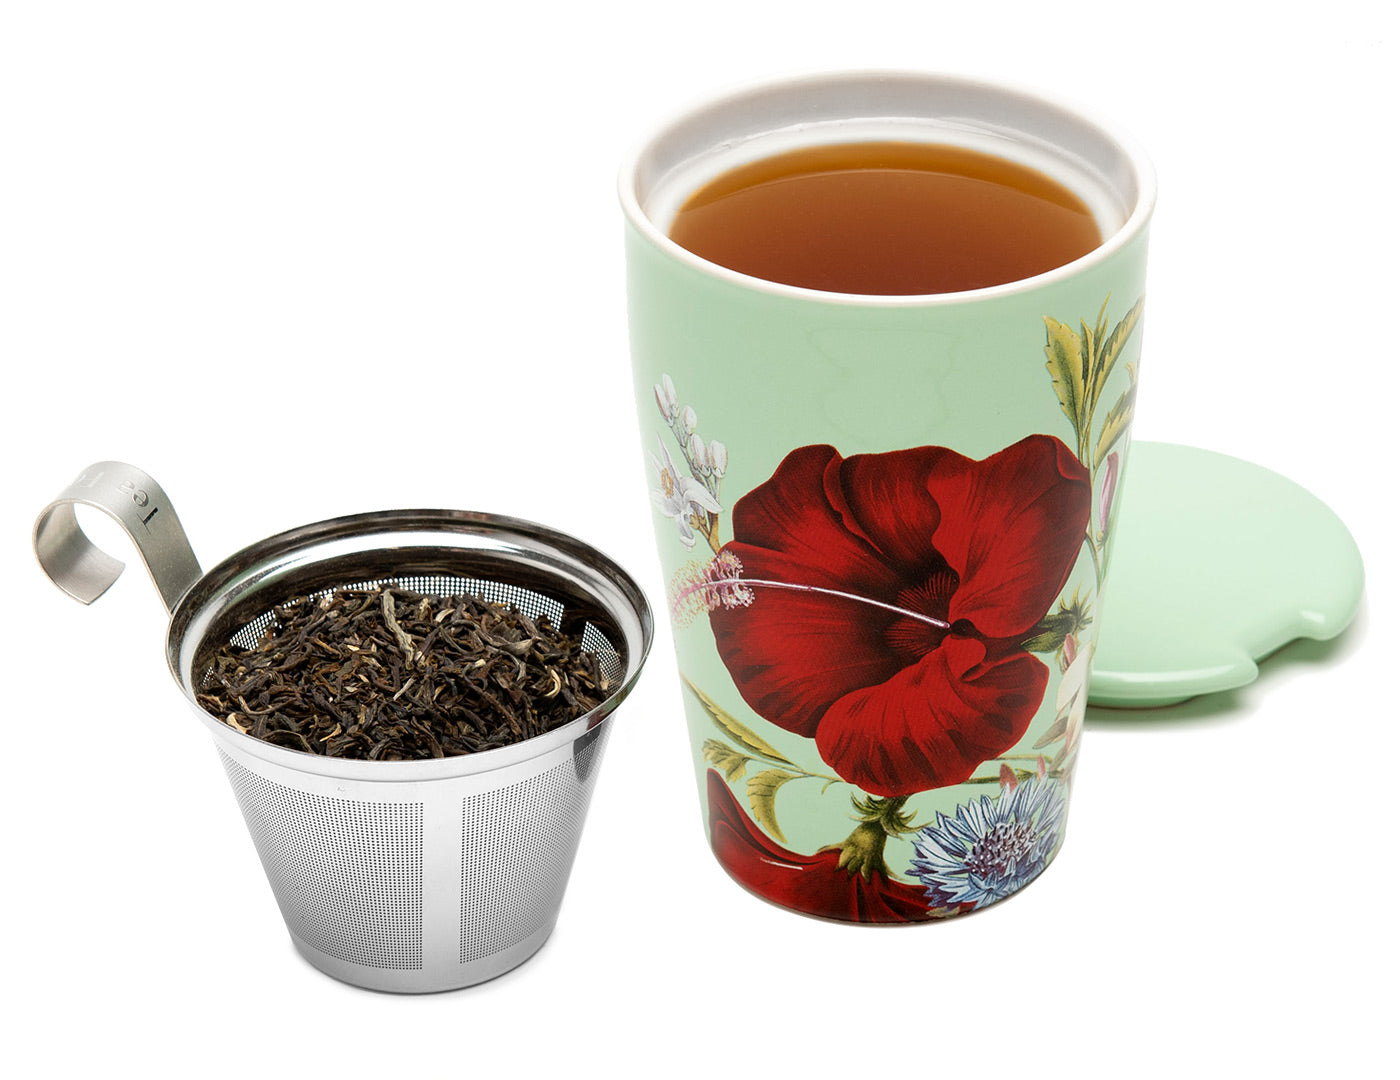 Fleur design KATI® Steeping cup with infuser showing stainless steel infuser with tea leaves